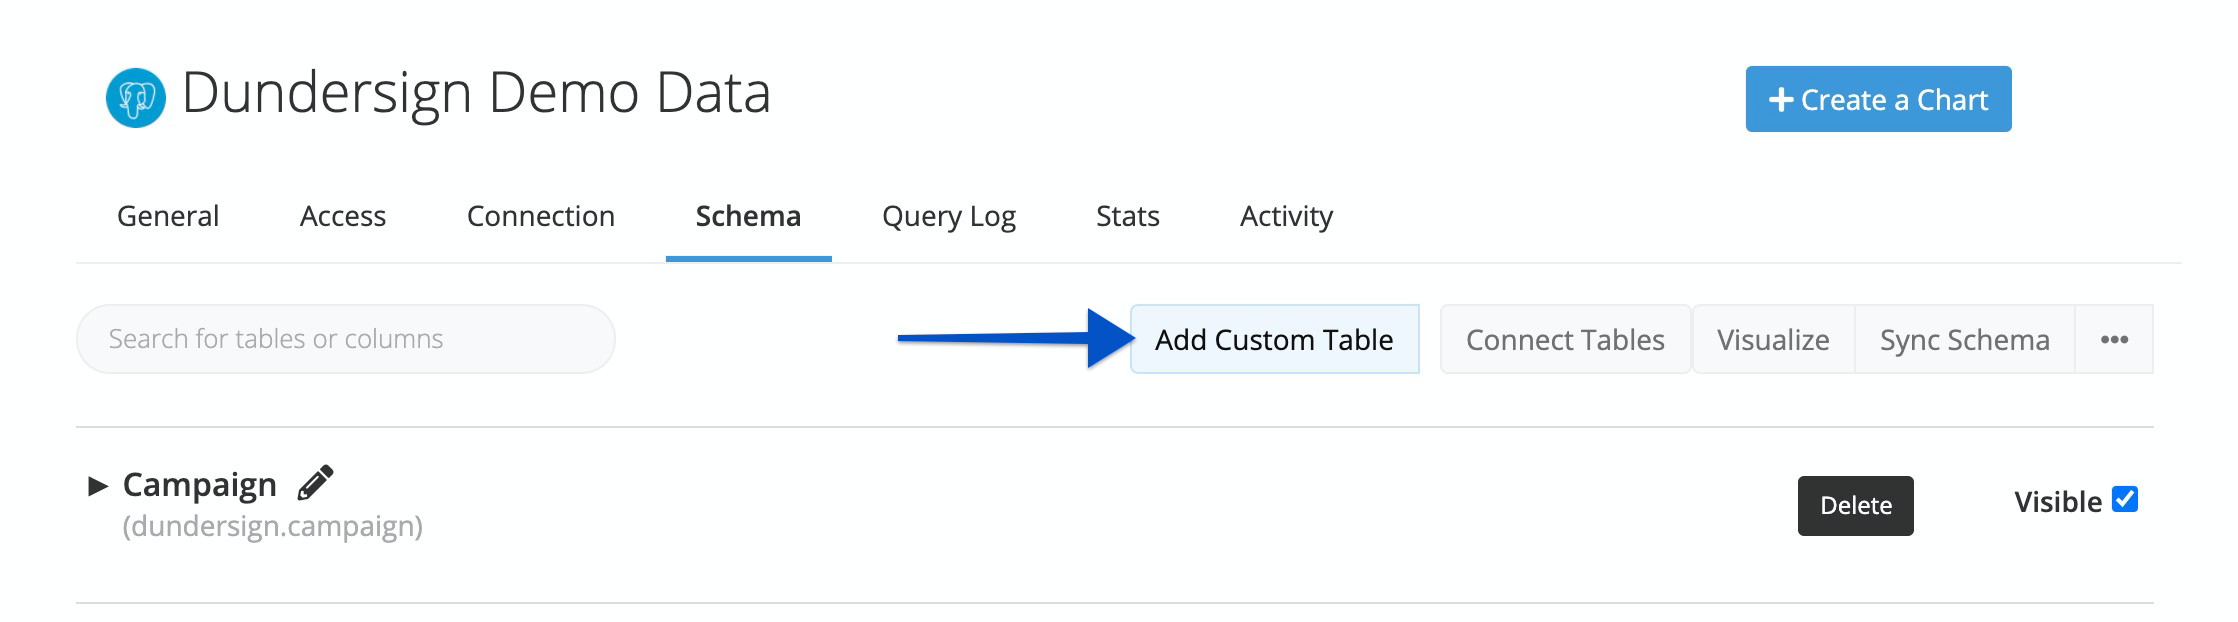 Click Add Custom Table from the Schema page